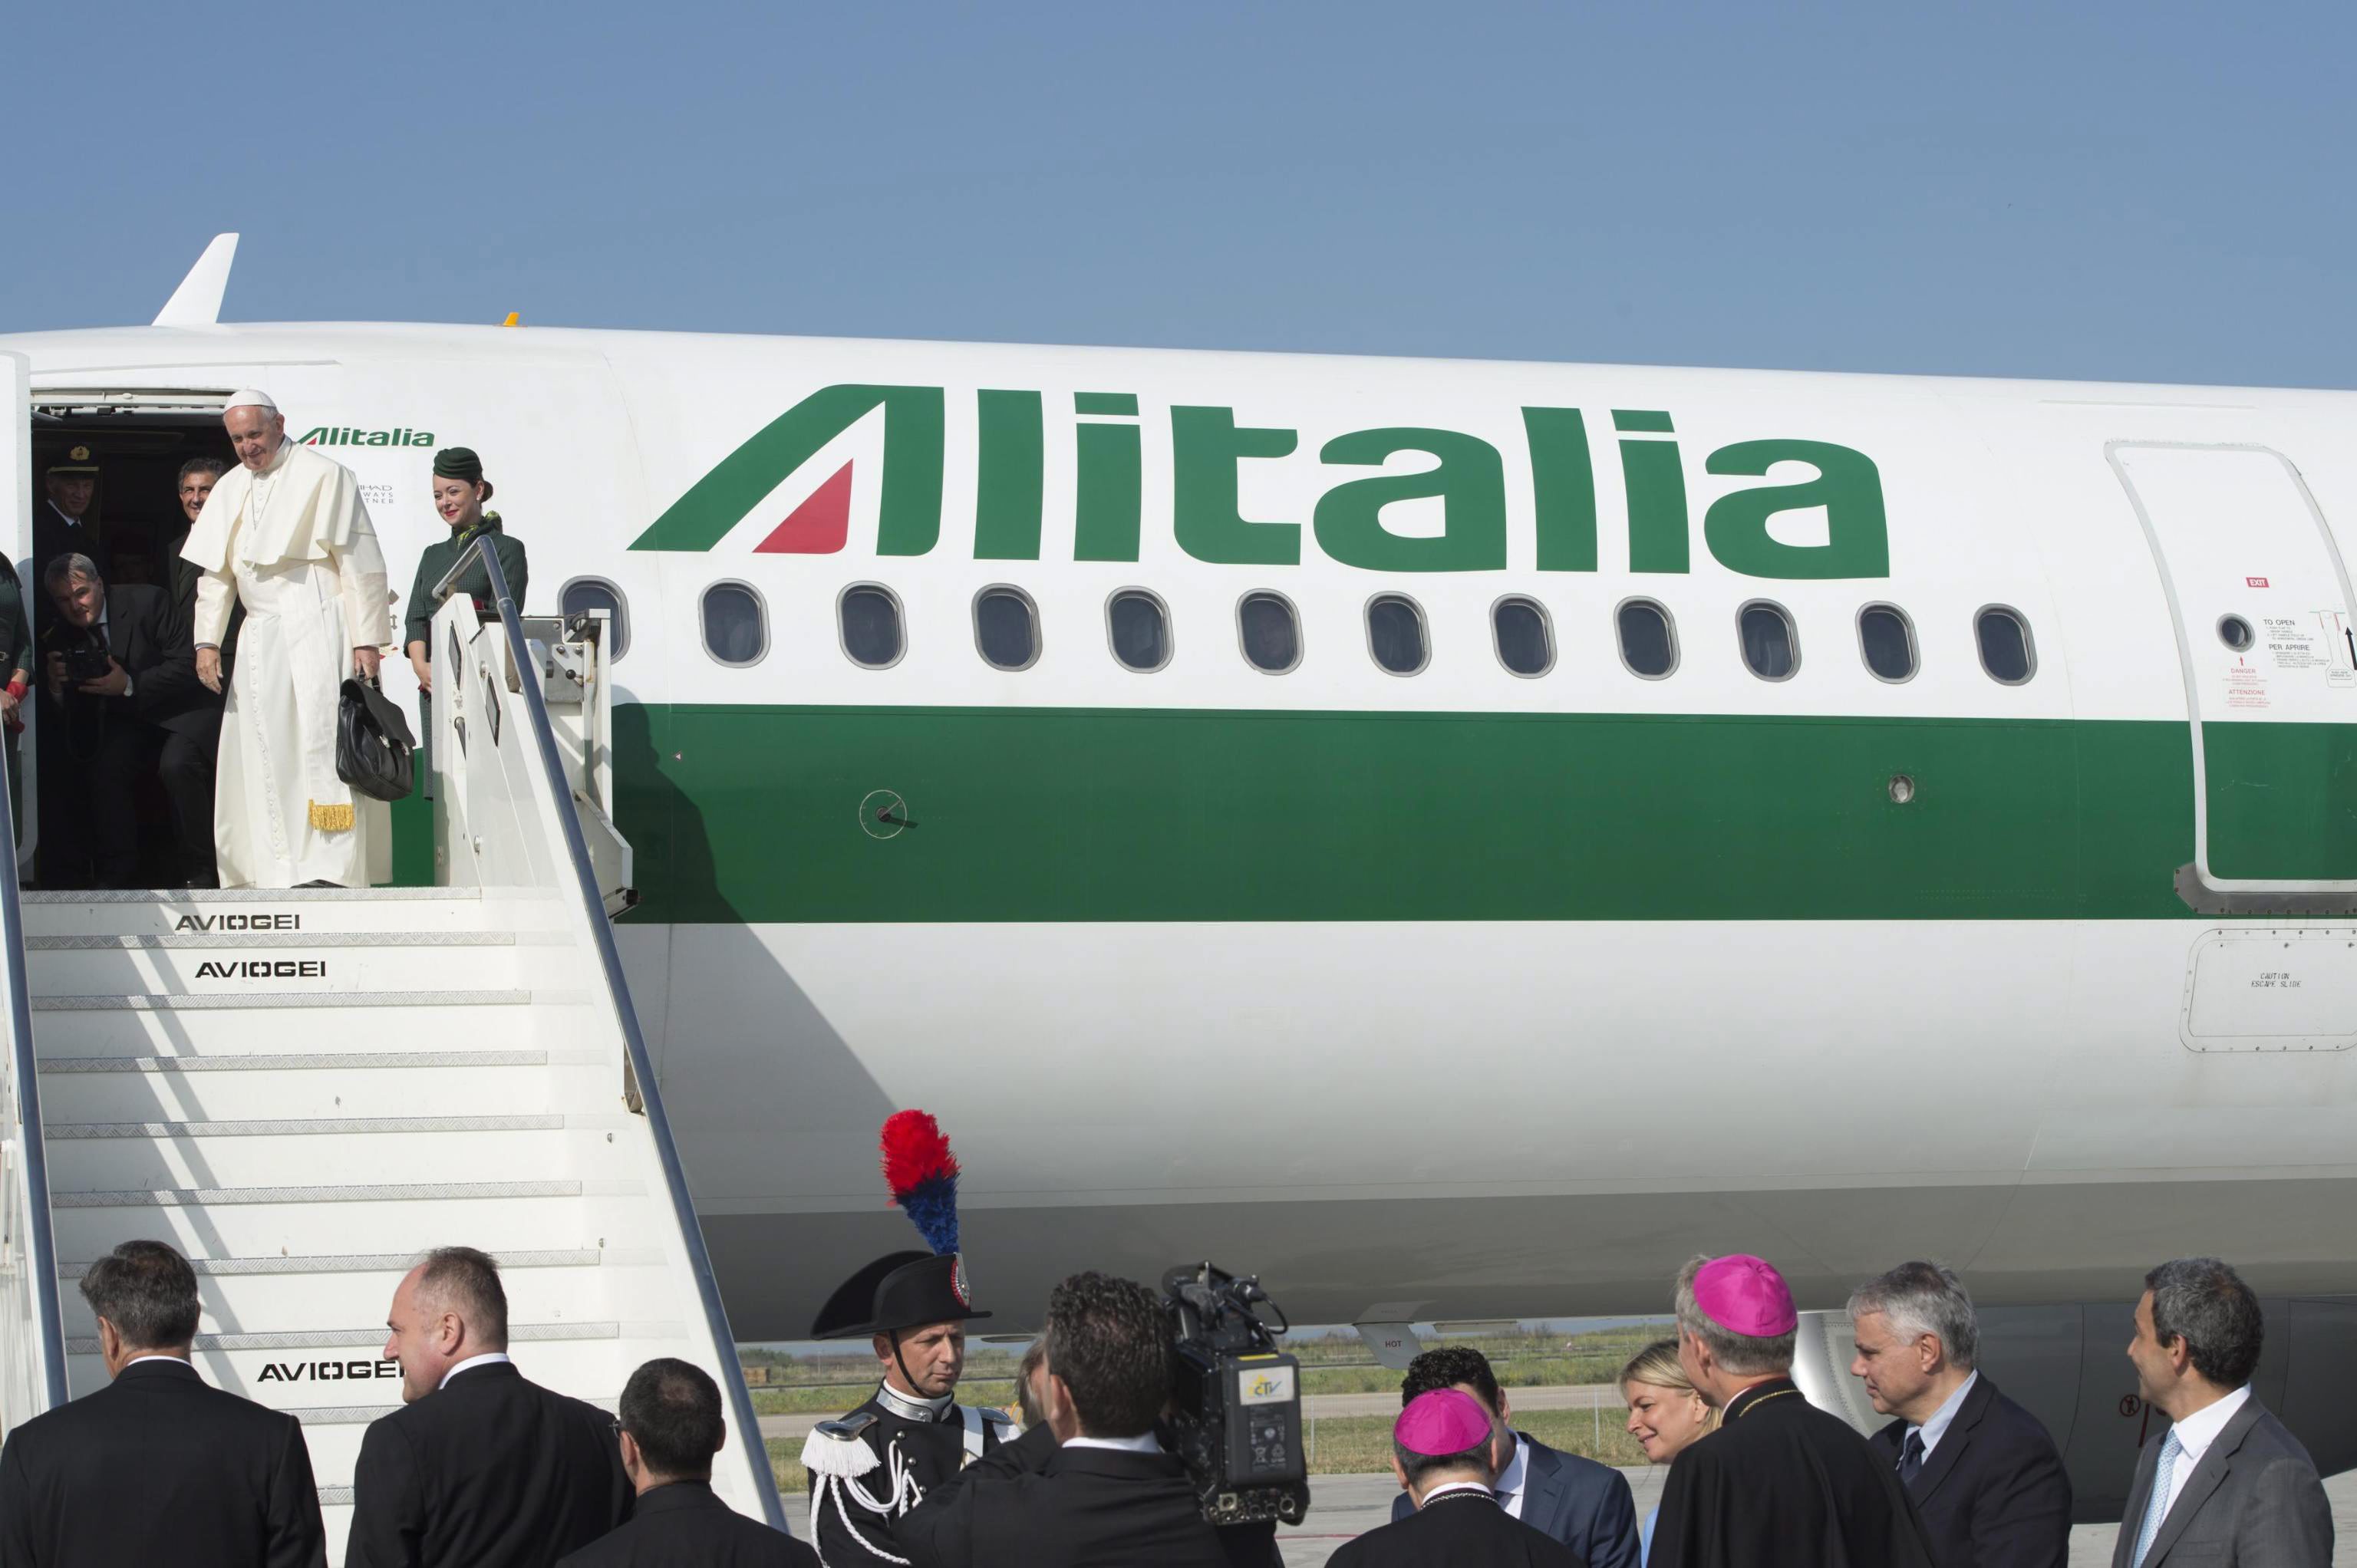 2016-06-24 08:59:50 epa05387983 A handout picture provided by the Vatican newspaper Osservatore Romano on 24 June 2016 shows Pope Francis at Fiumicino Airport boarding a plane for Yerevan, Armenia, with an Alitalia flight, Rome, Italy, 24 June 2016. 24 June 2016. The Pope will spend 3 days in Armenia on an official visit. EPA/OSSERVATORE ROMANO / HANDOUT HANDOUT EDITORIAL USE ONLY/NO SALES